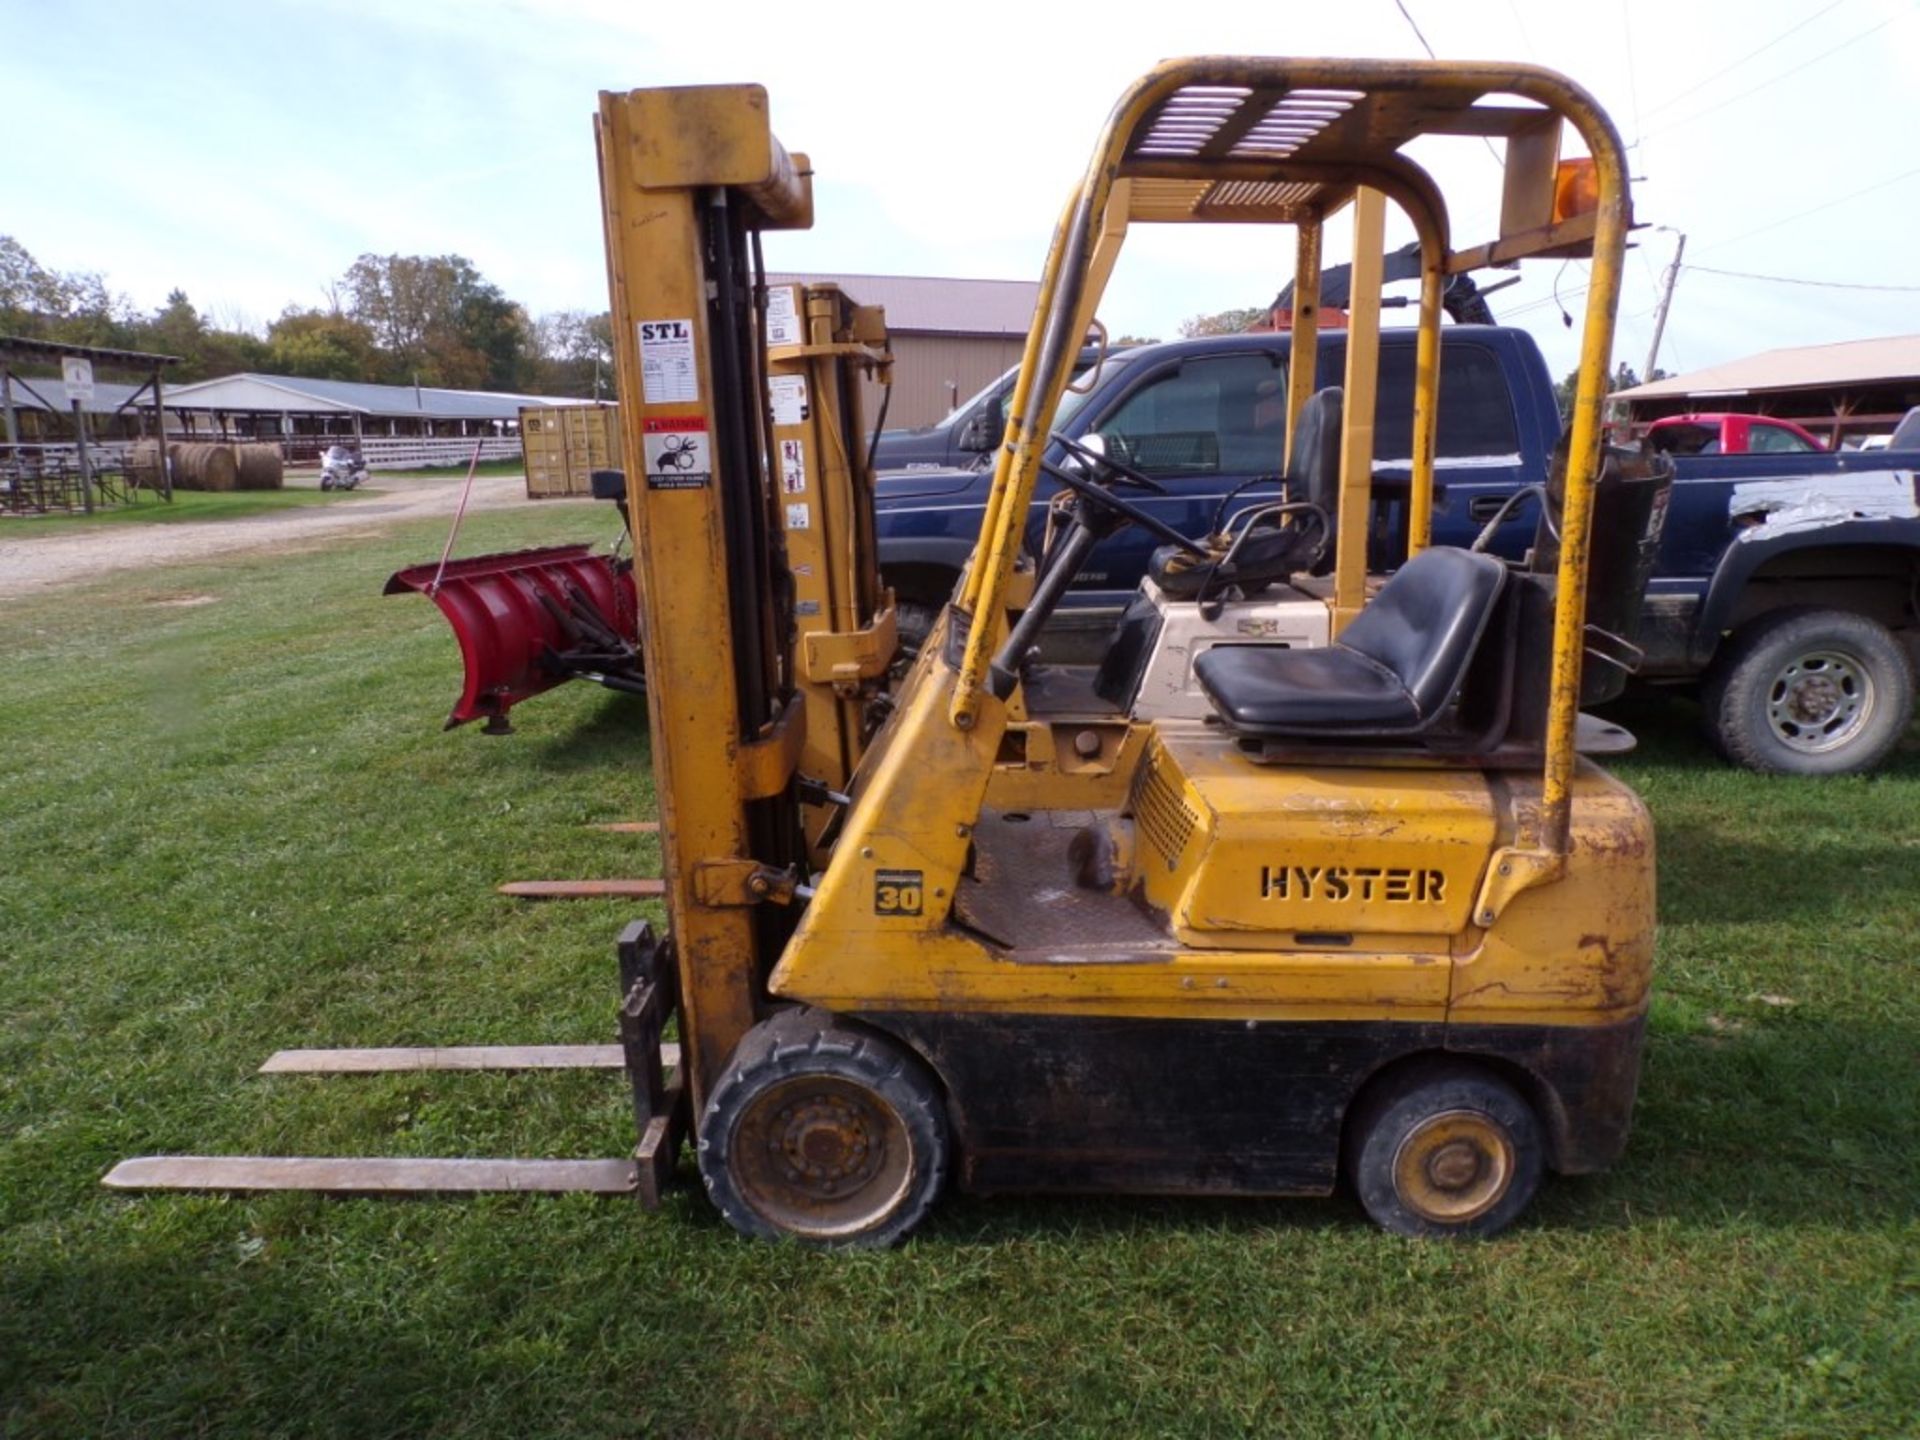 Hyster Space Saver, Model 530A, S/N A0101D15860, Propane Forklift, No Tank (6108)